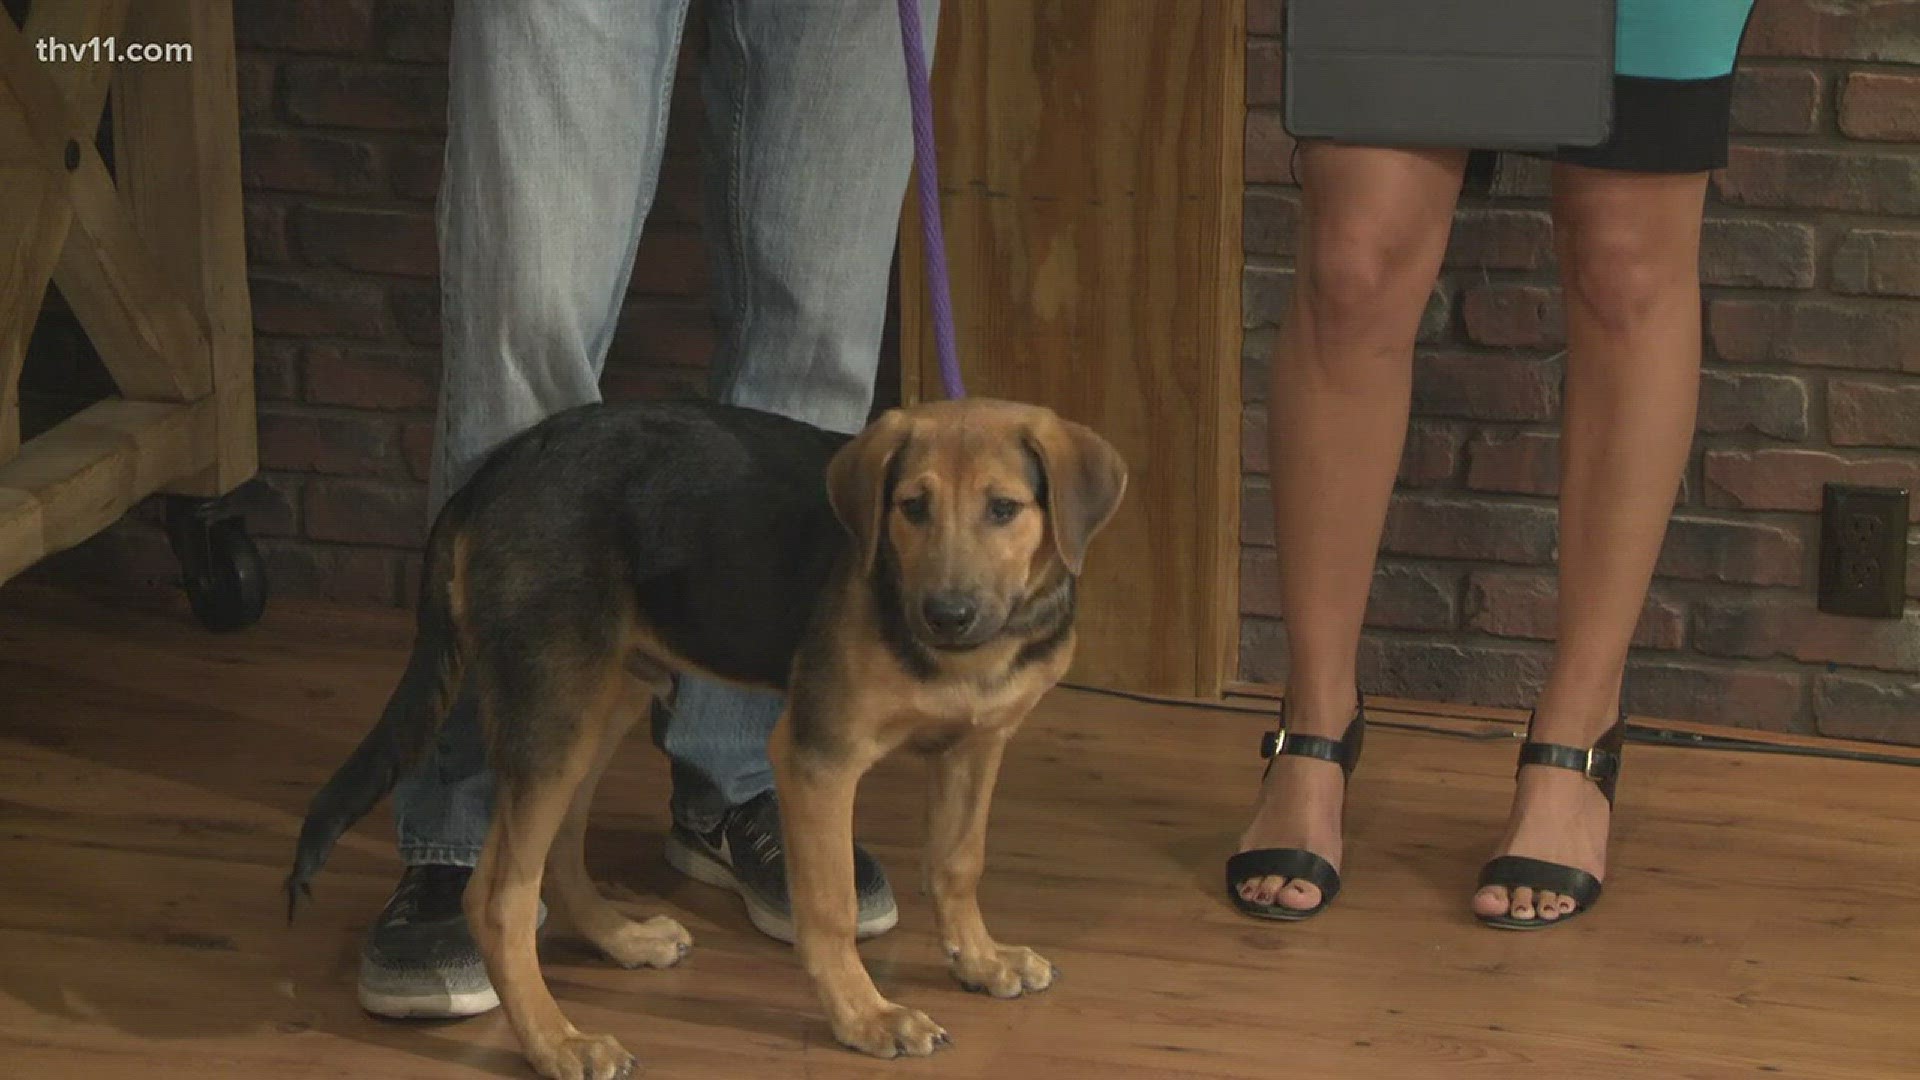 This week, Paul Hughes from Friends of the Animal Village joined THV11 This Morning with Marty the hound mix.